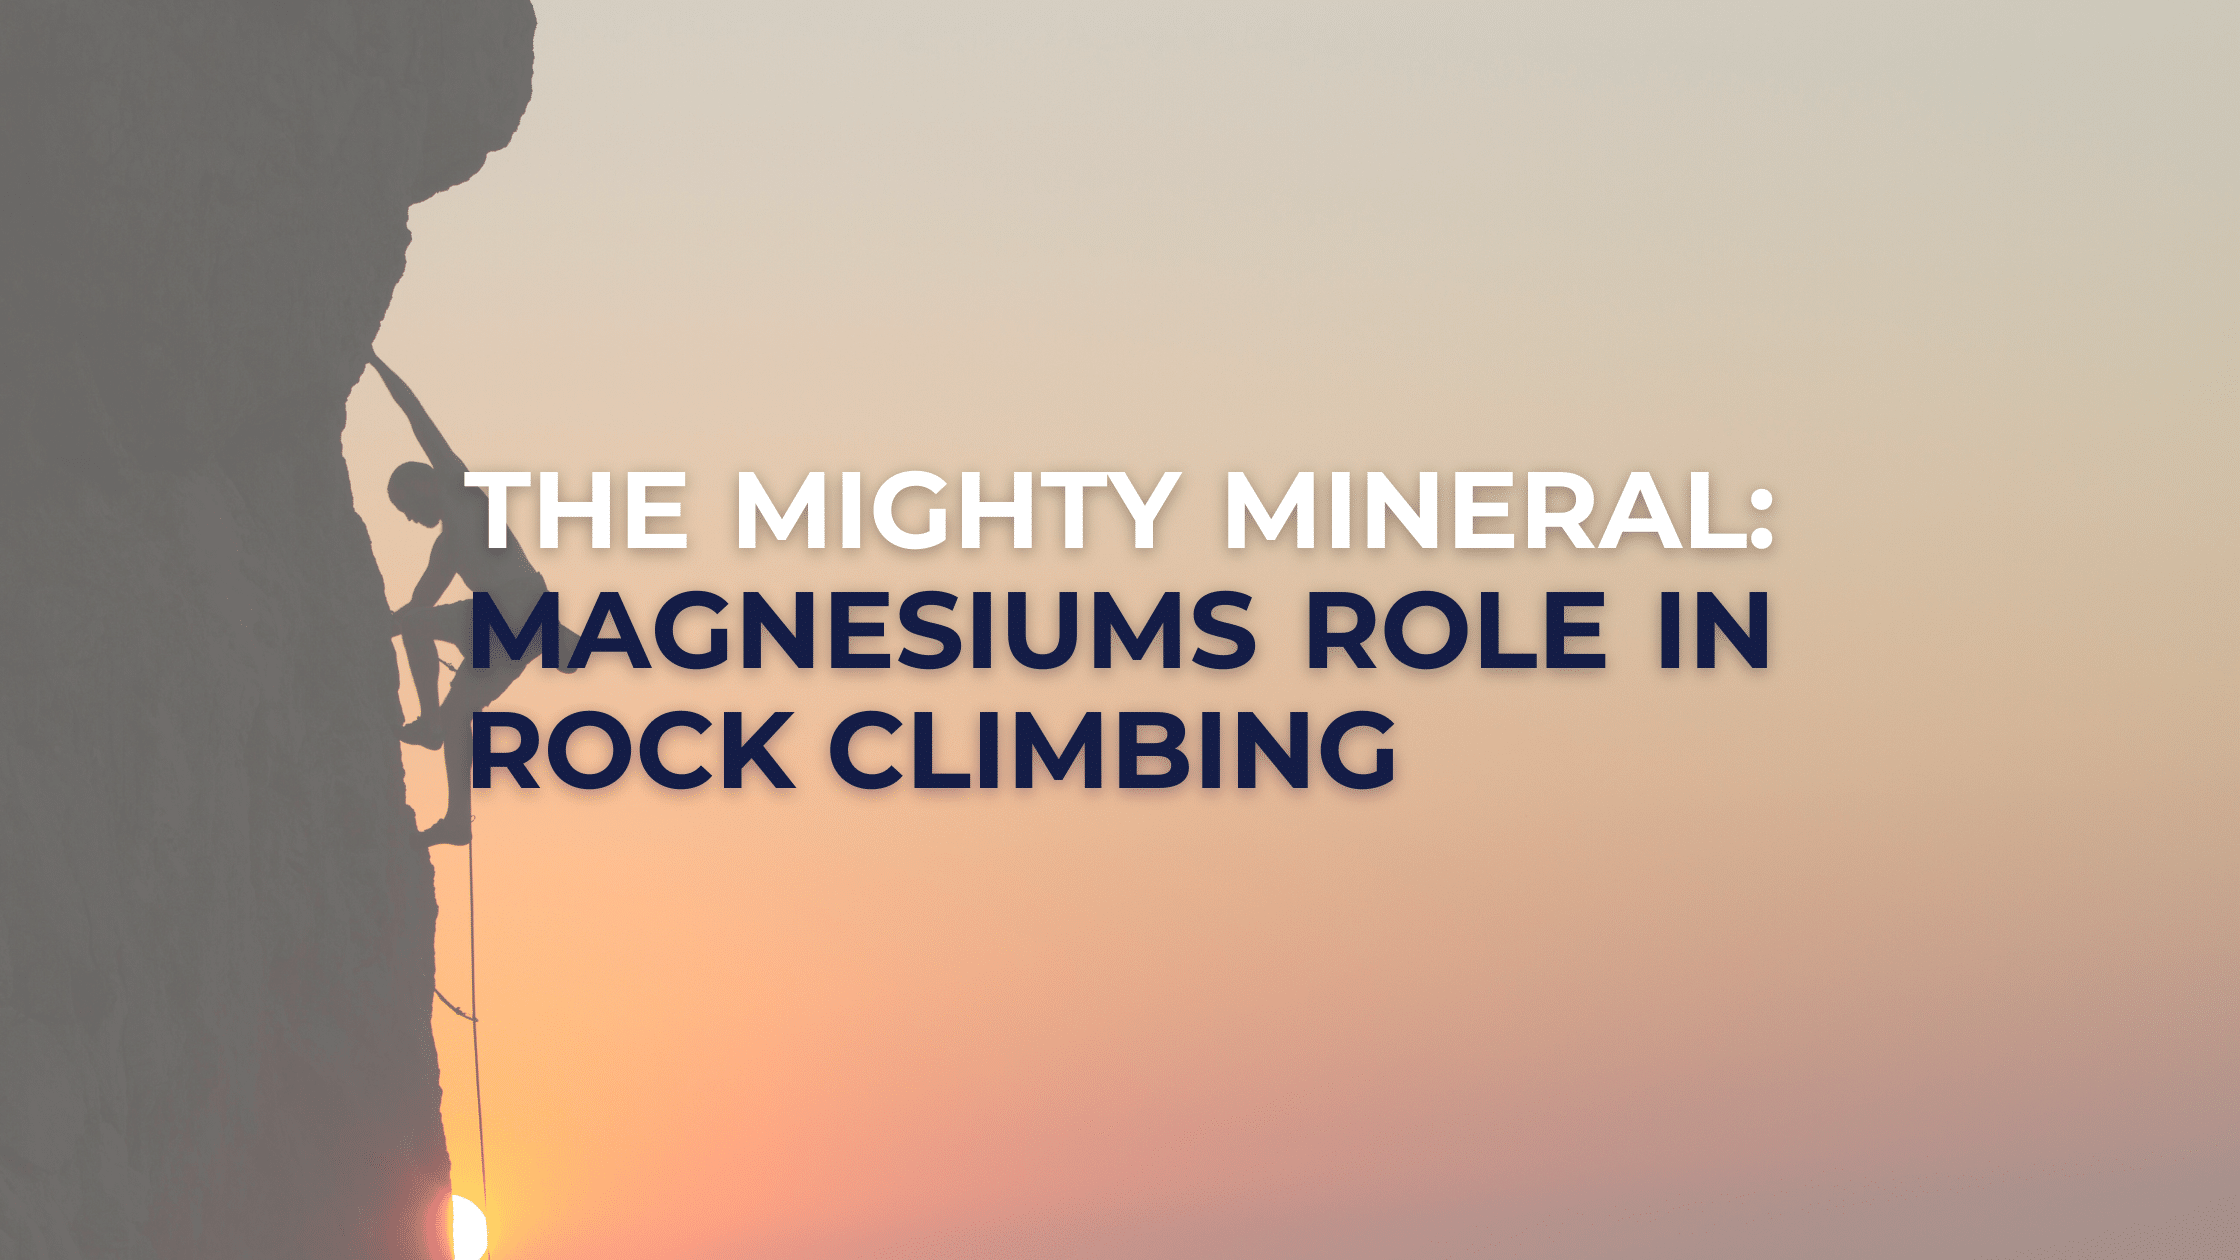 The Mighty Mineral: Magnesium’s Role in Rock Climbing